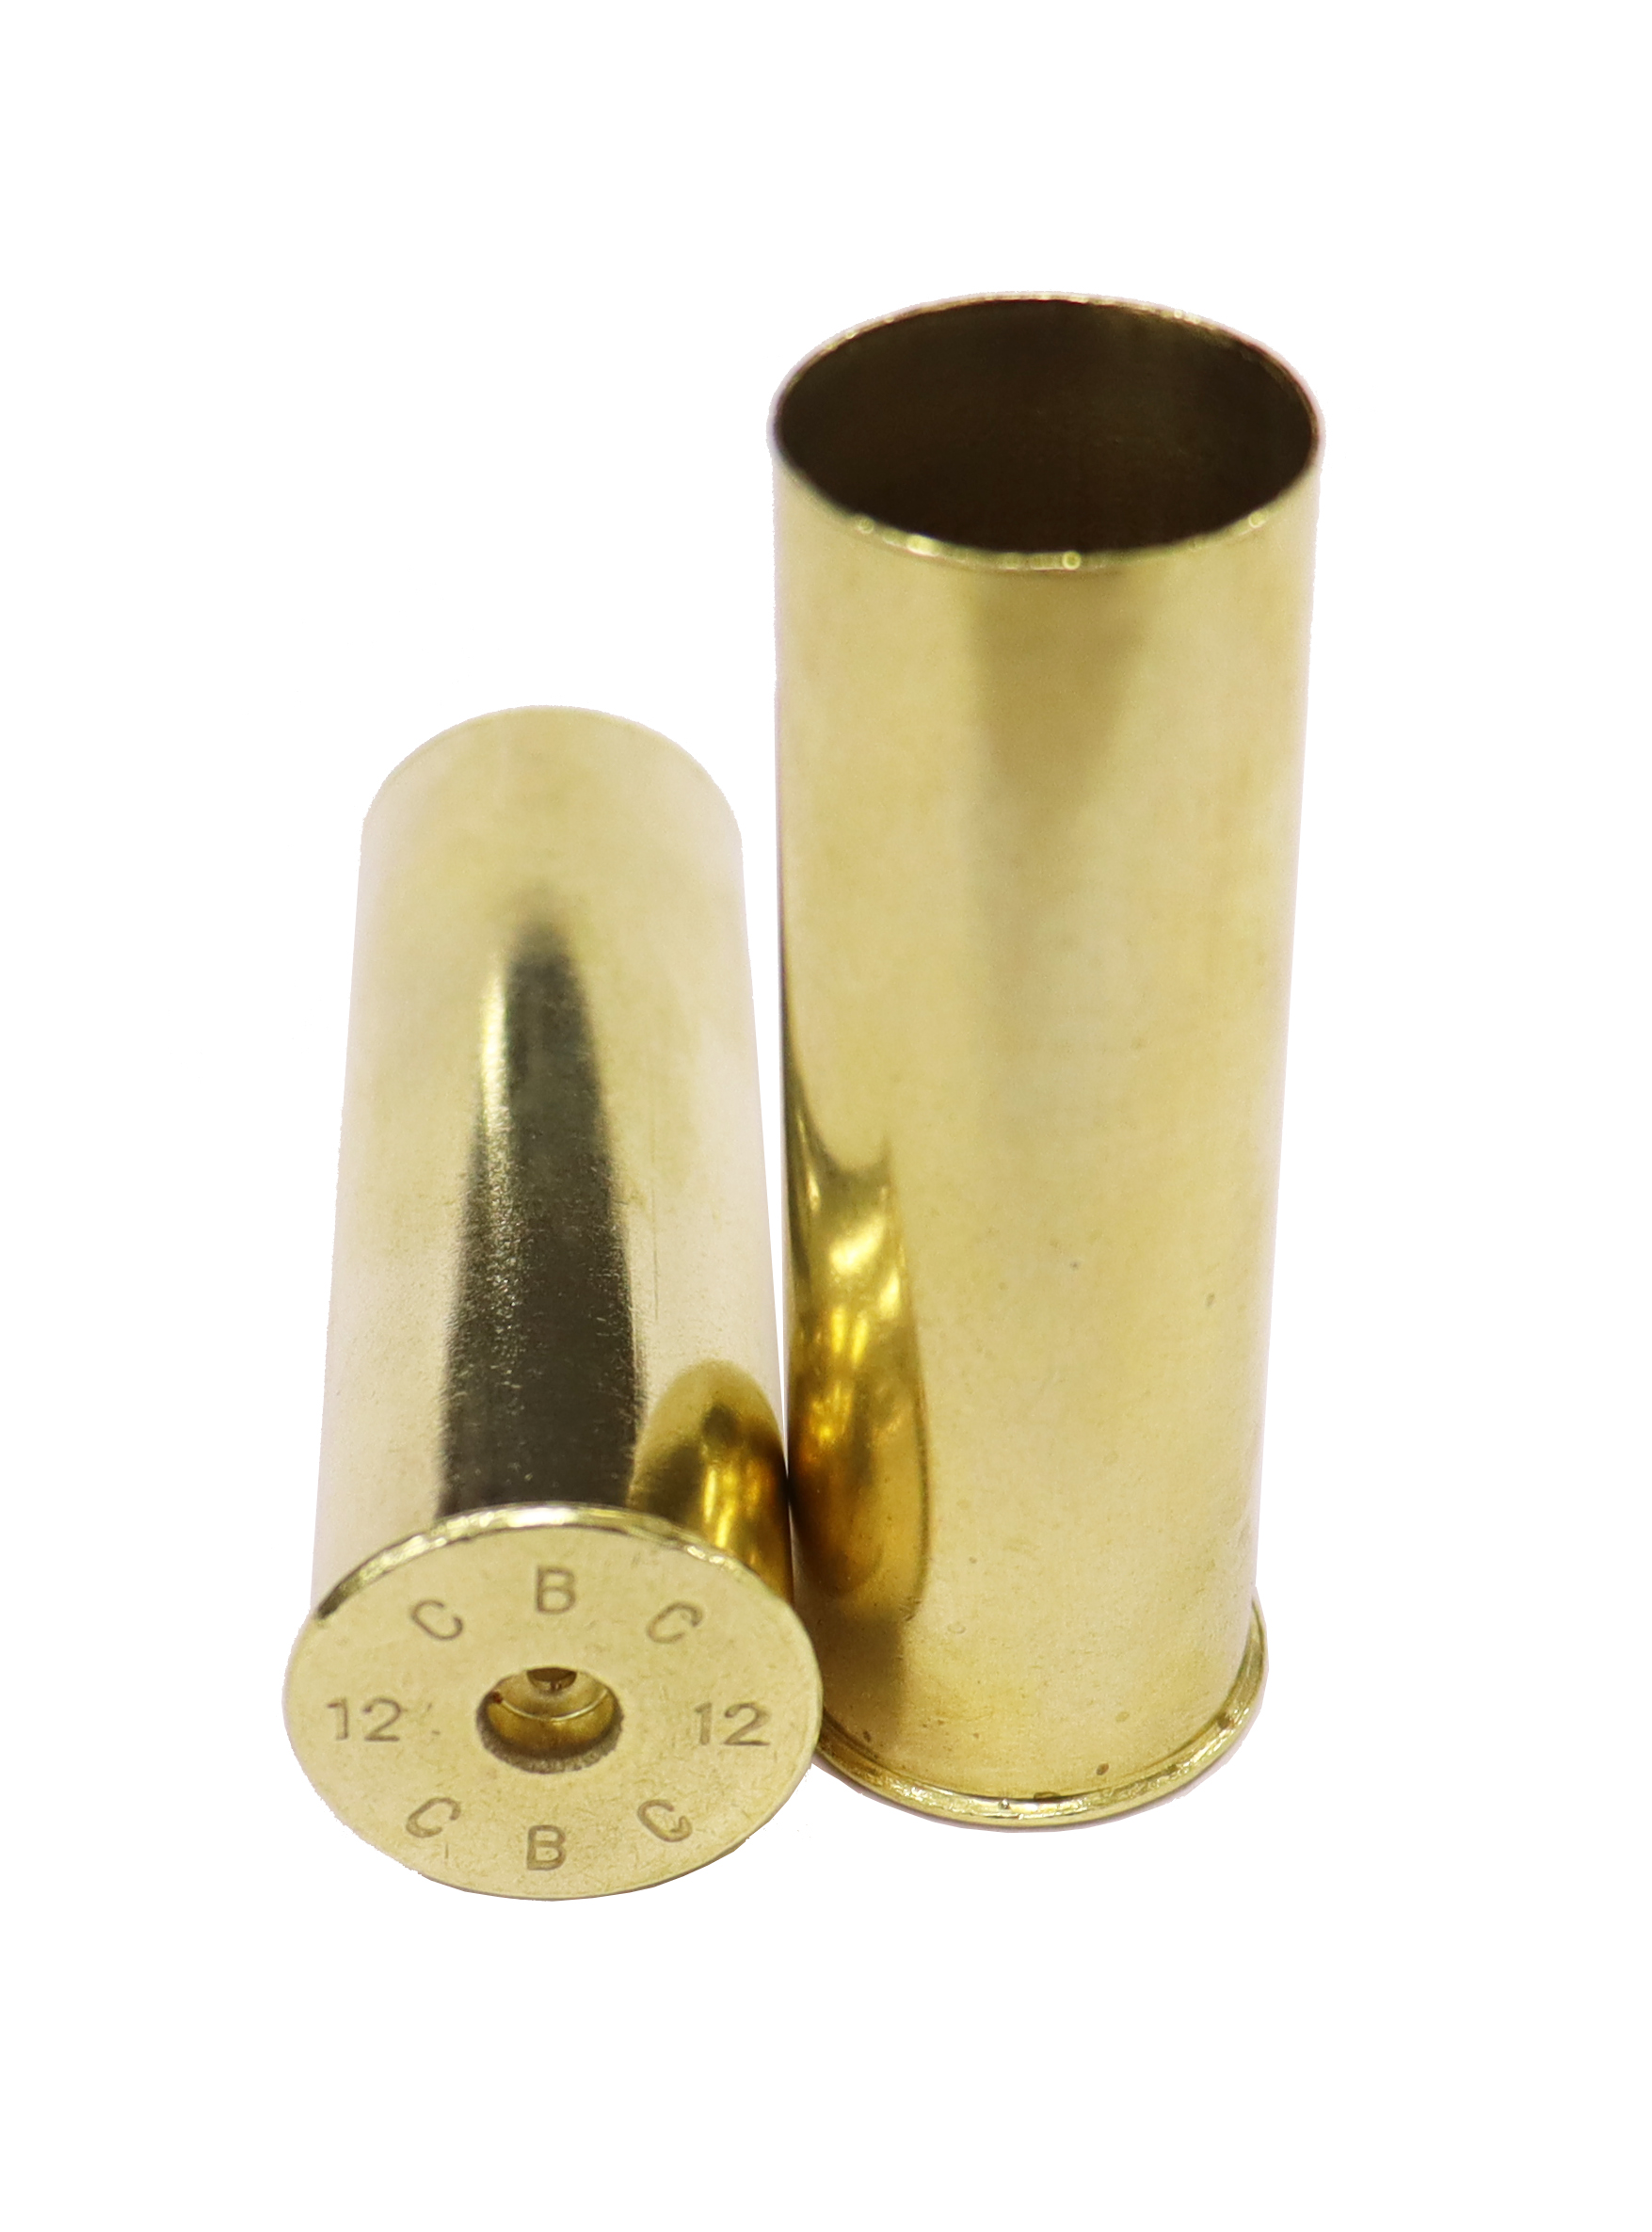 Shooting Magtech brass 12ga slugs for function and 3 powders 